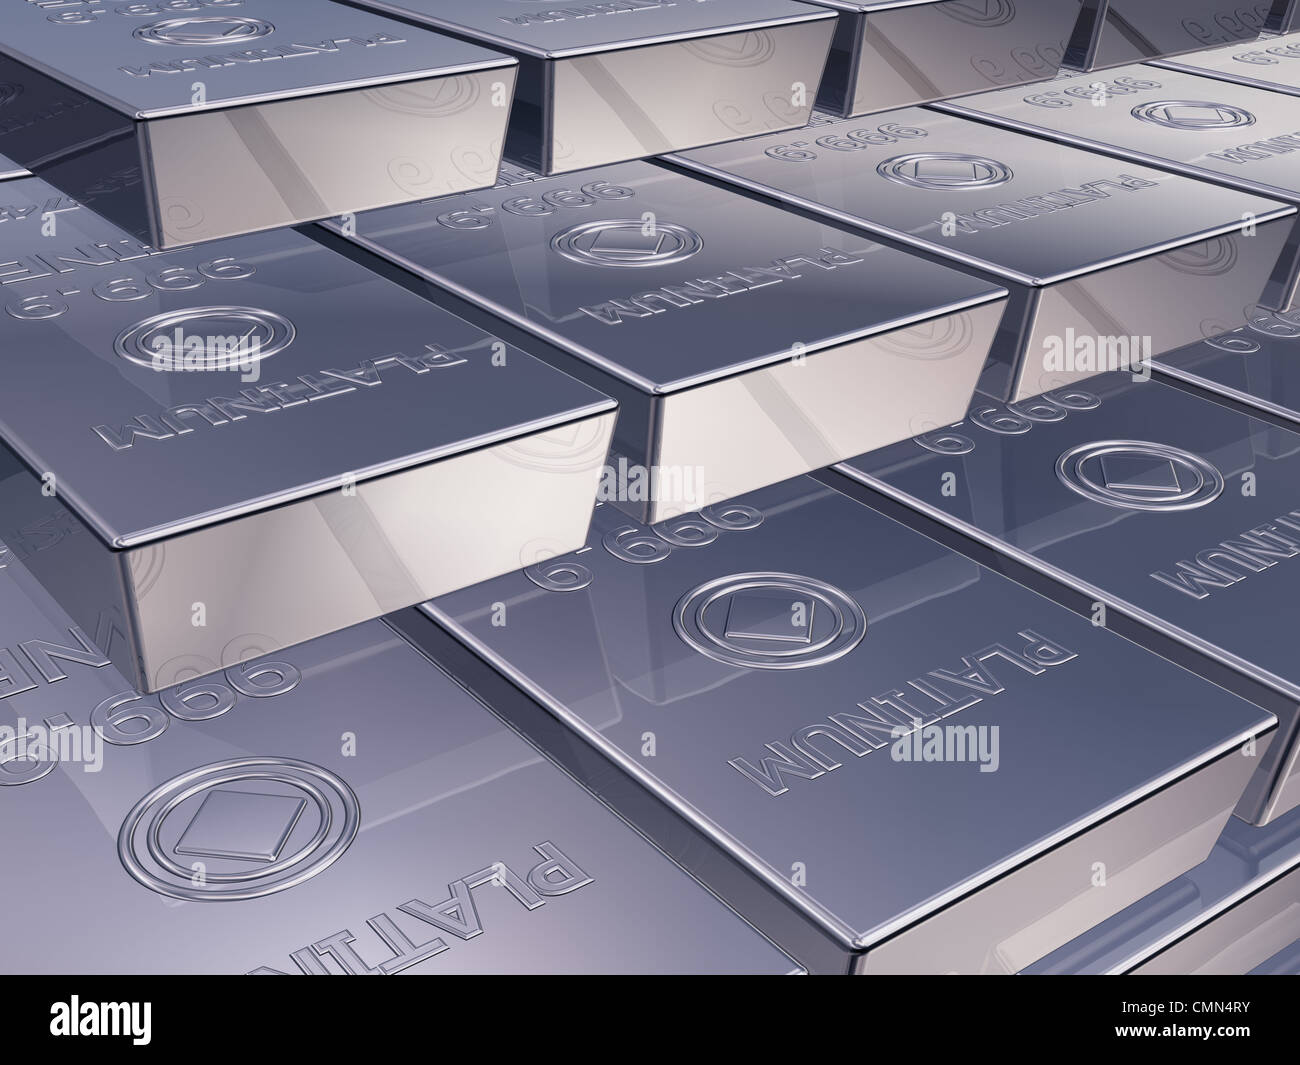 Illustration of platinum reserves piled high in a stack Stock Photo